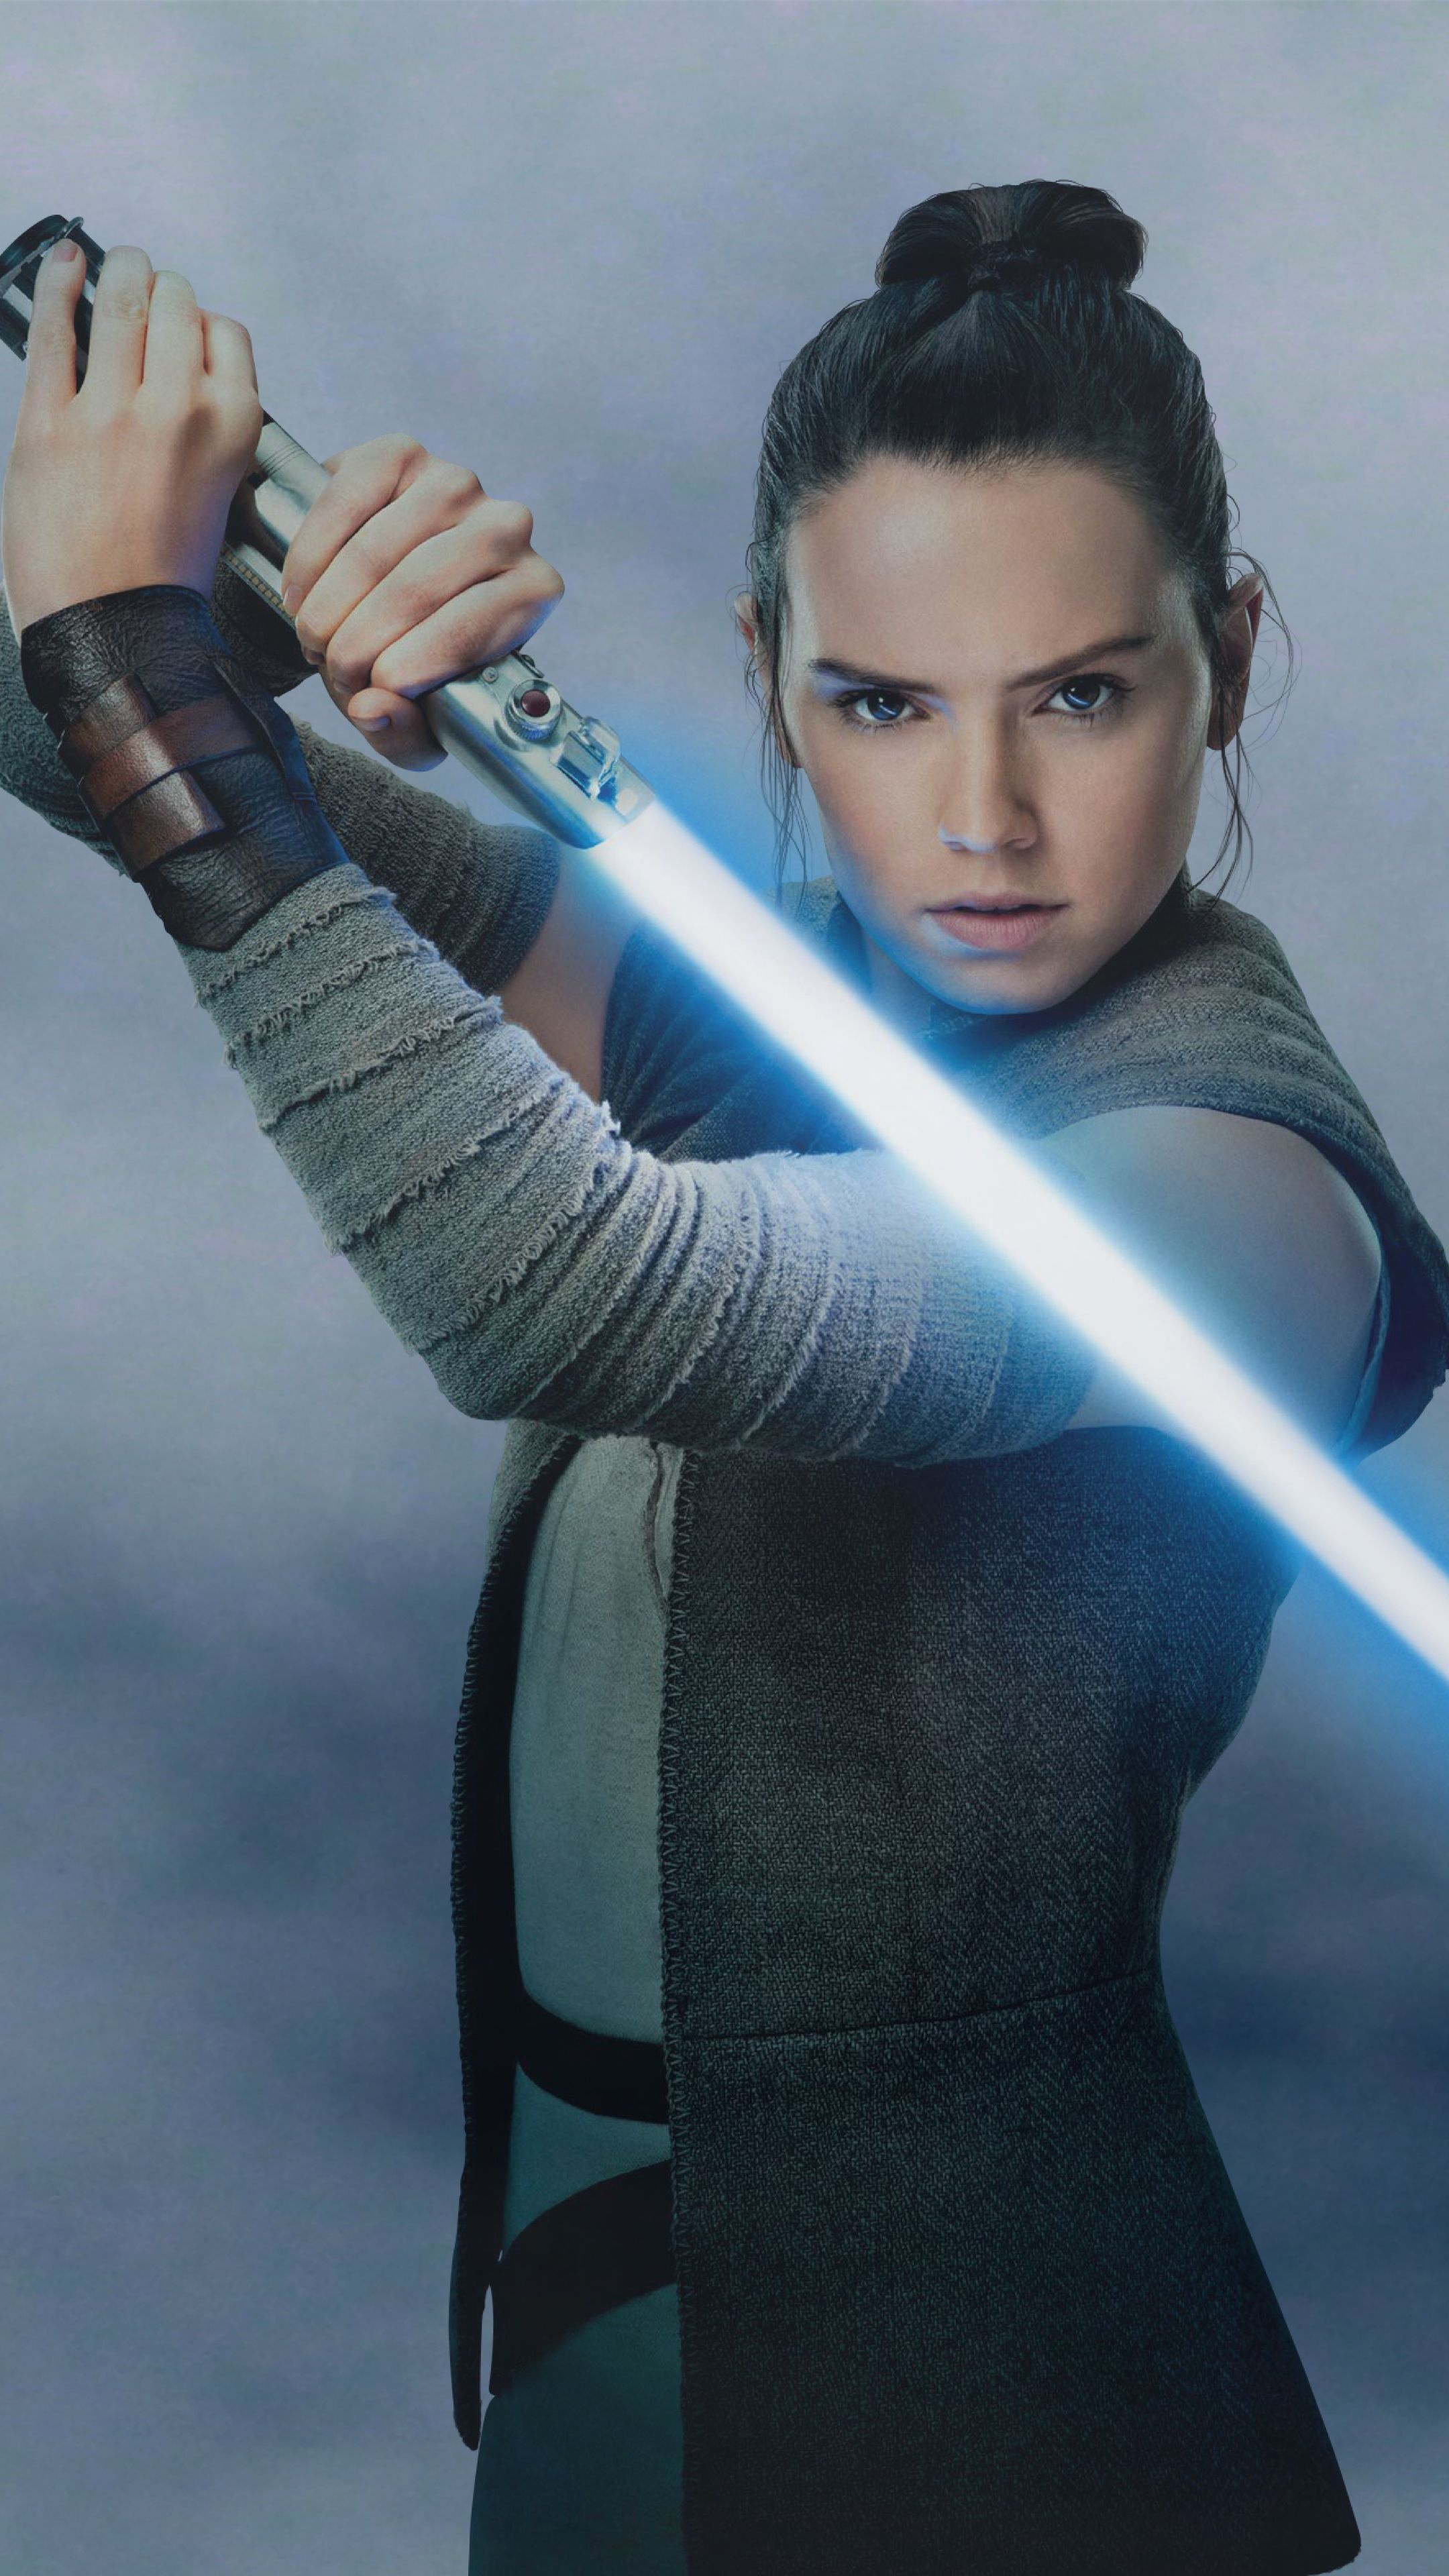 Star Wars: The Rise Of Skywalker: Daisy Ridley, The film premiered in Los Angeles on December 16, 2019. 2160x3840 4K Wallpaper.